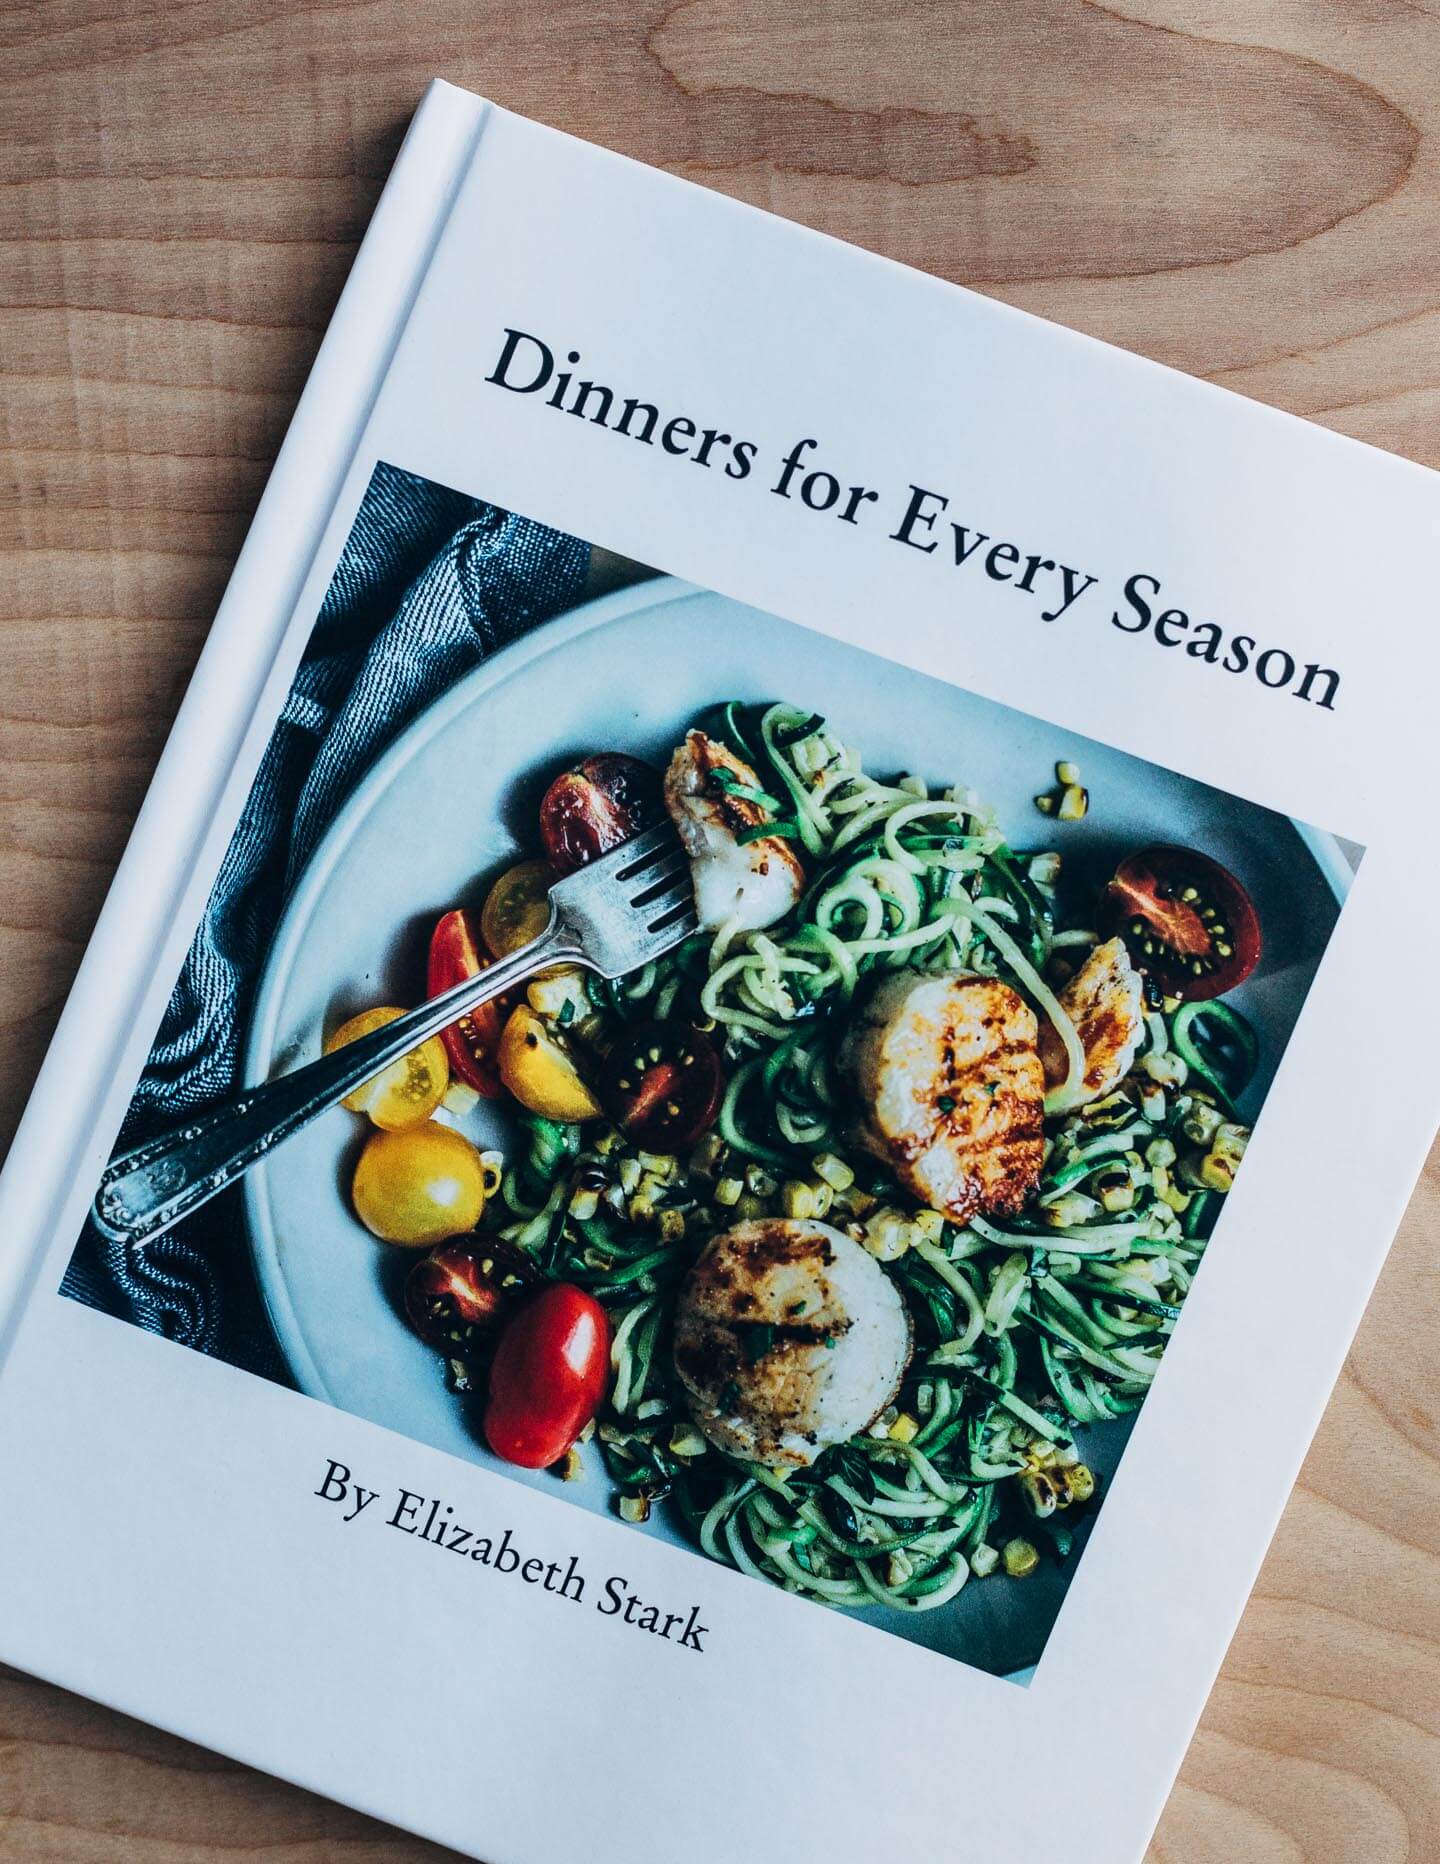 I’ve partnered with Blurb to create a cookbook dedicated to my favorite seasonal dinner recipes.